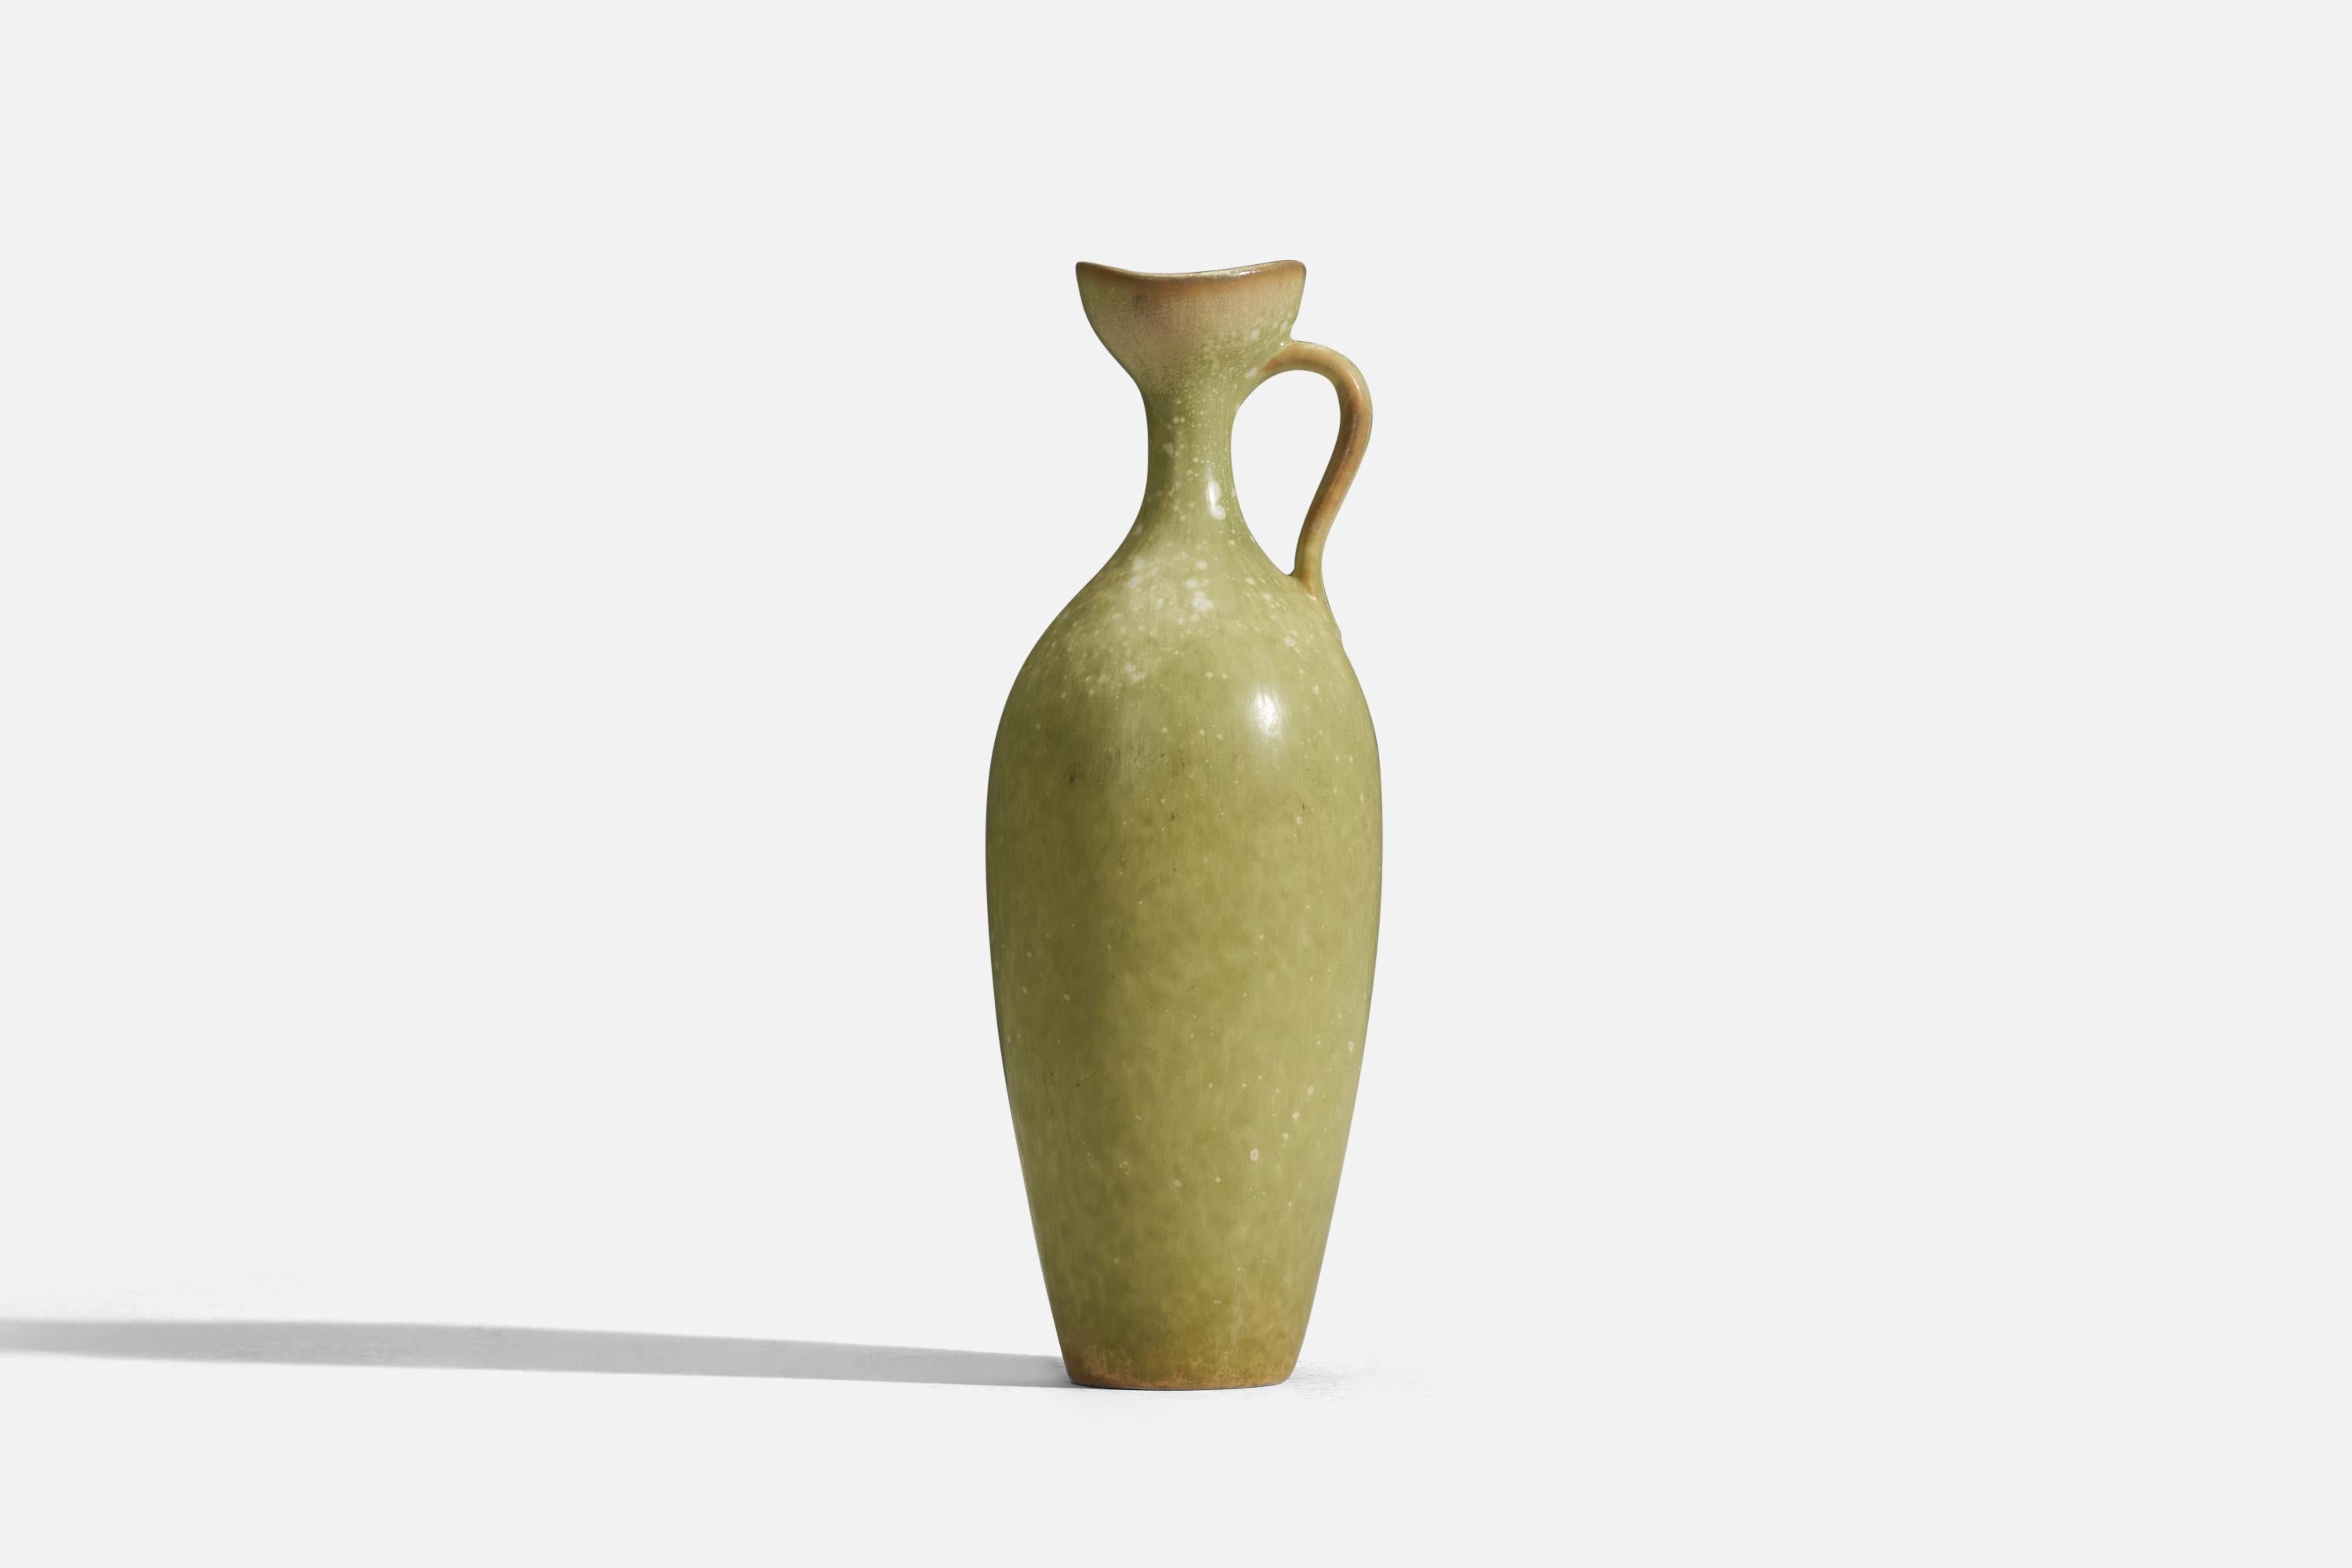 A green glazed stoneware pitcher designed by Gunnar Nylund and produced by Rörstrand, Sweden, 1950s.